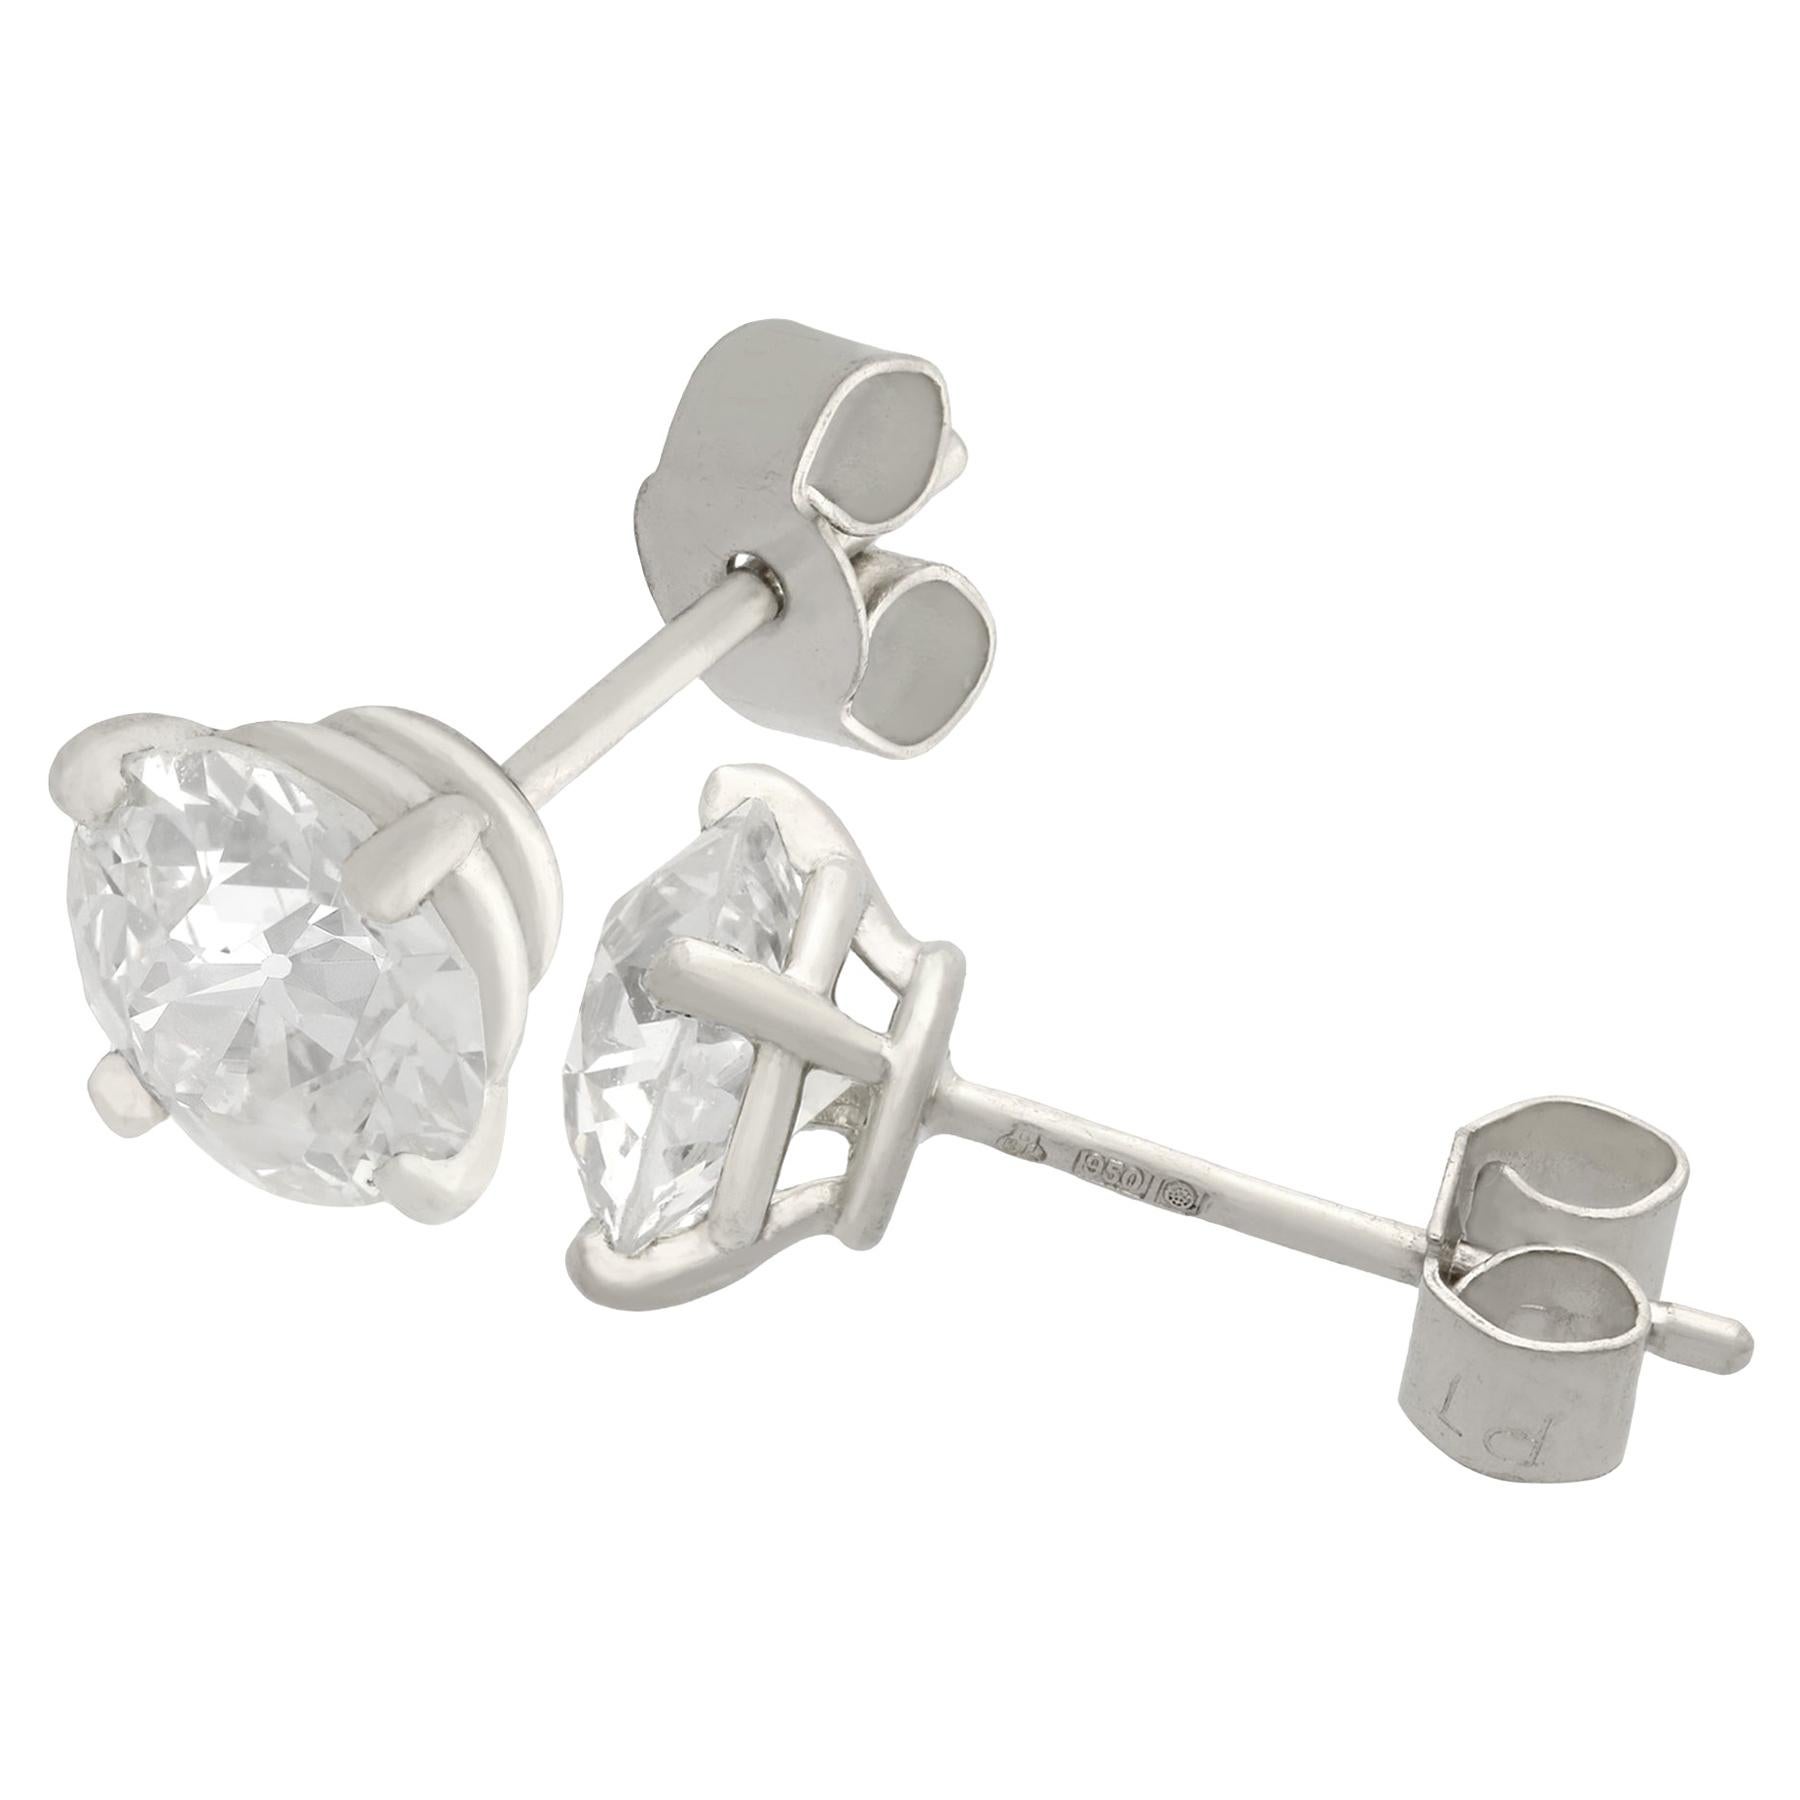 A stunning pair of vintage and contemporary 0.92 carat diamond and platinum stud earrings; part of our diverse diamond jewelry and estate jewelry collections.

These stunning, fine and impressive diamond stud earrings have been crafted in